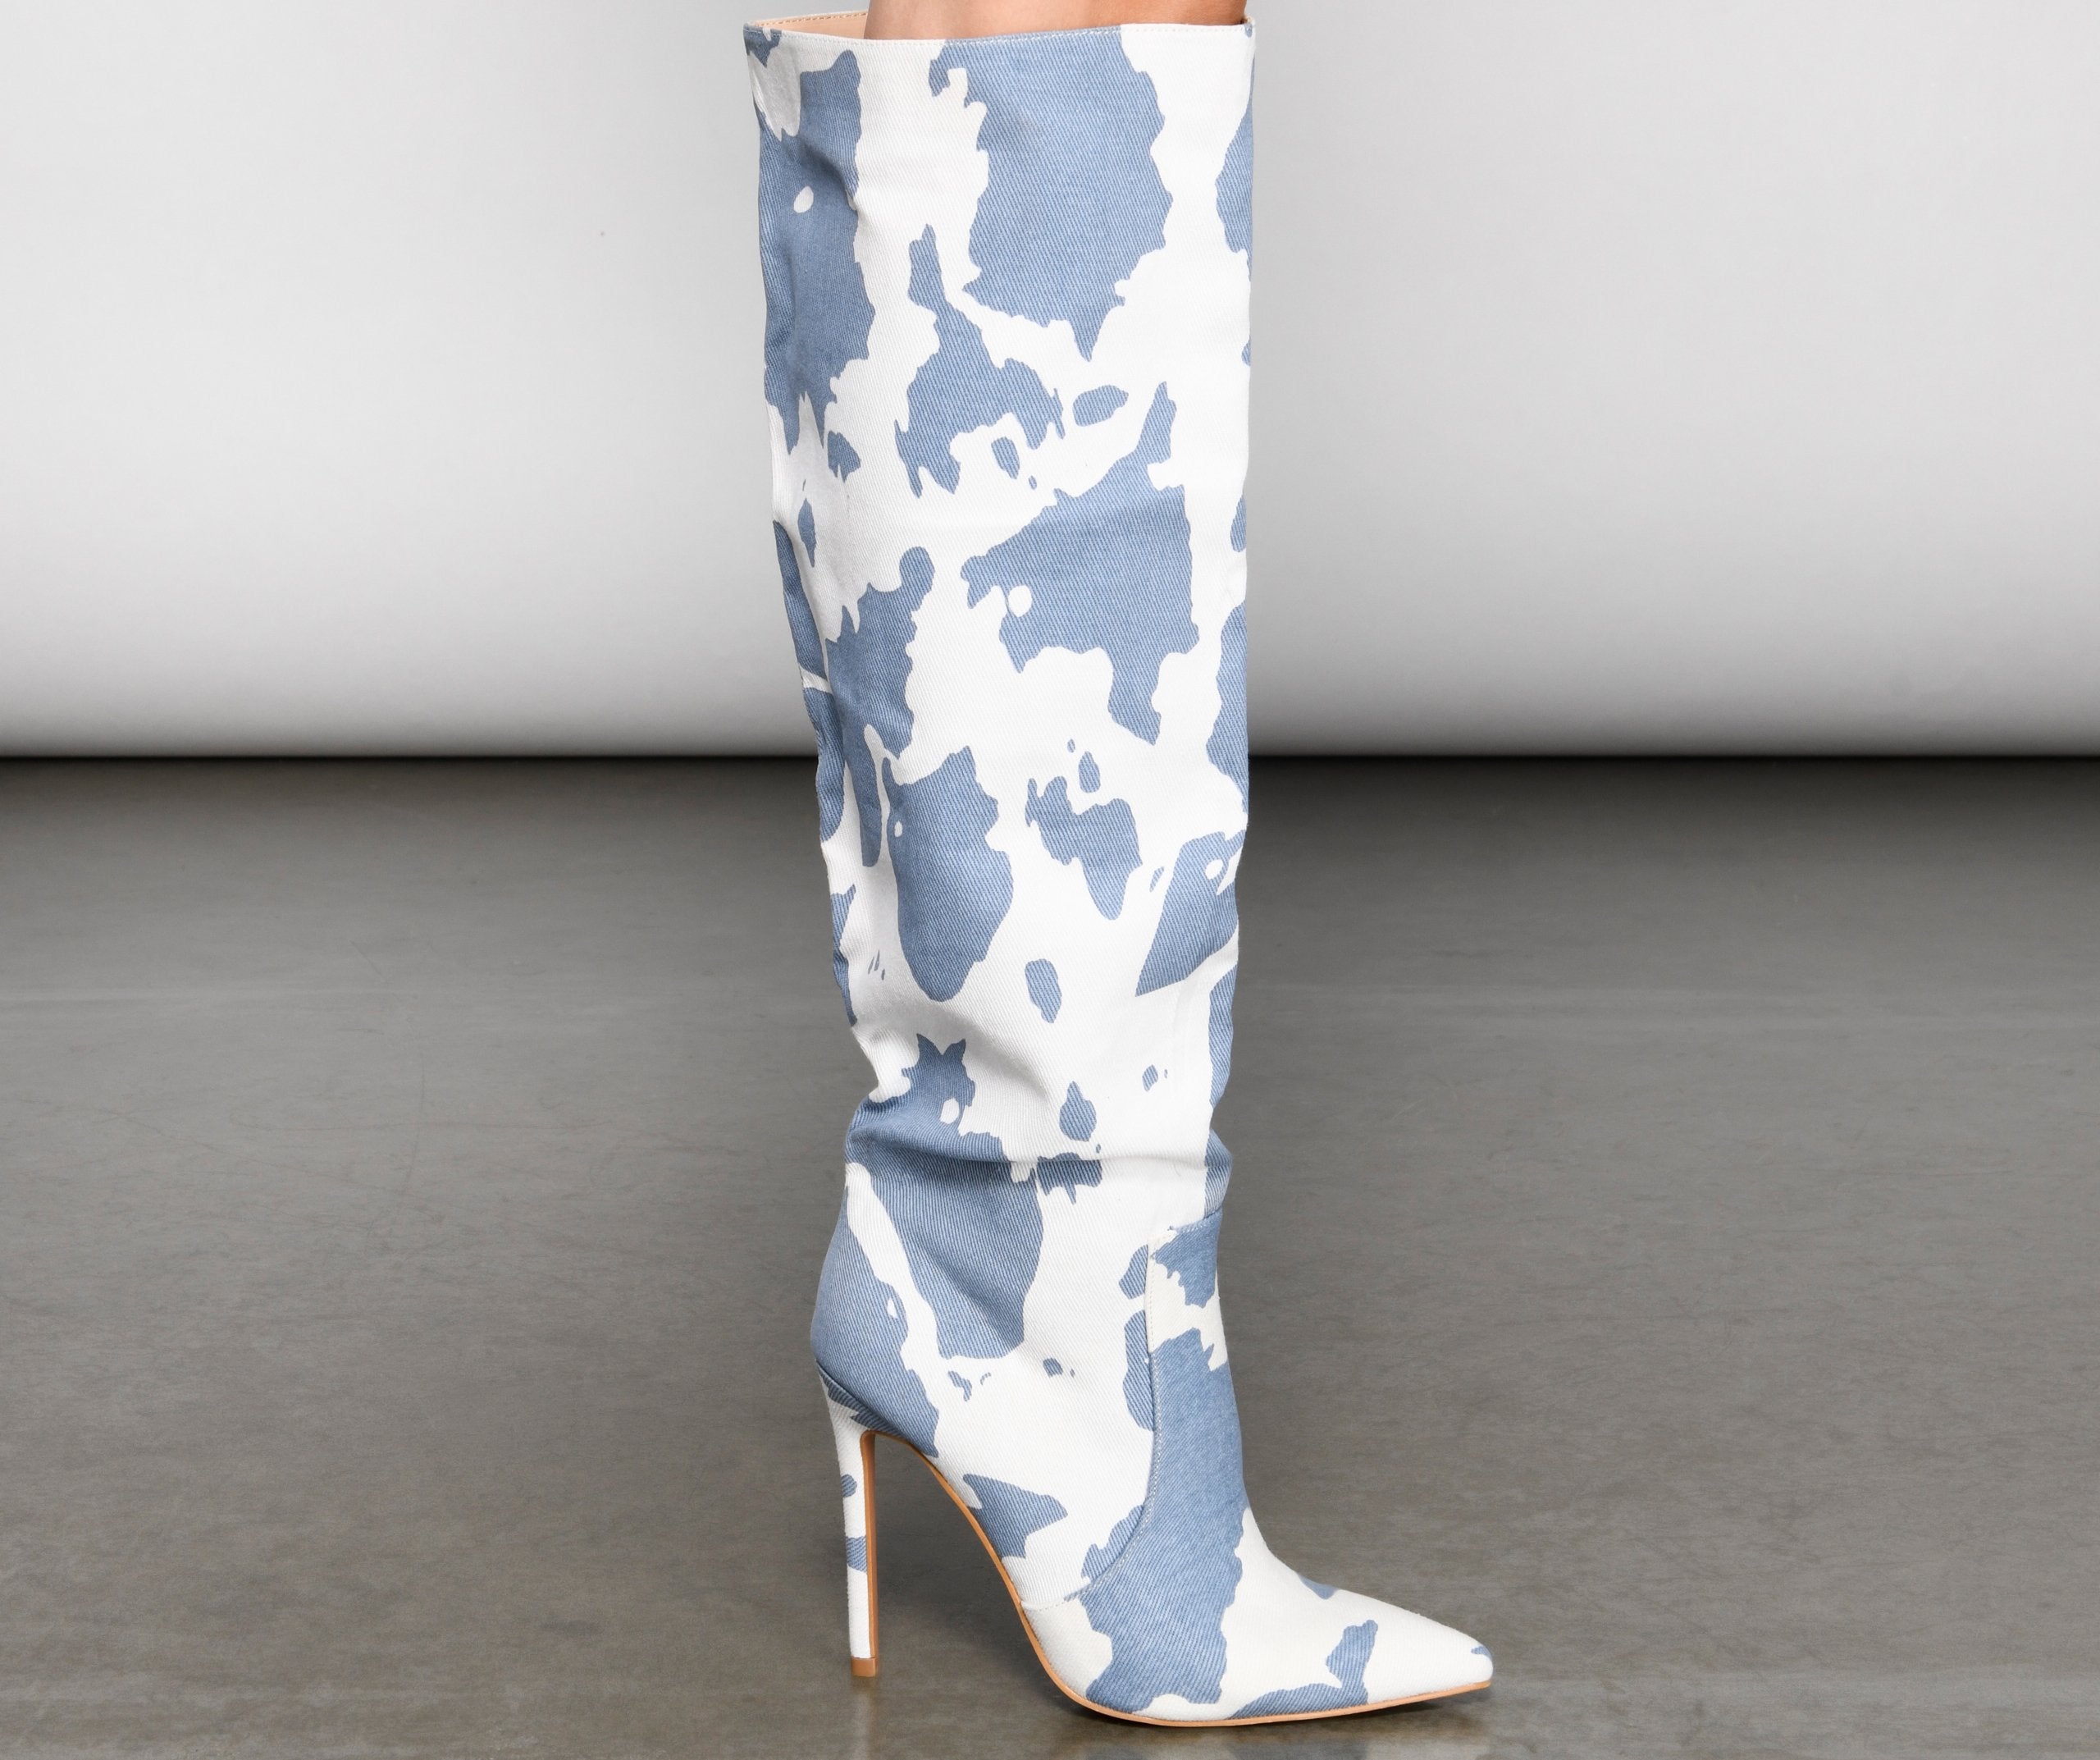 Moo Over Denim Knee-High Stiletto Boots - Lady Occasions